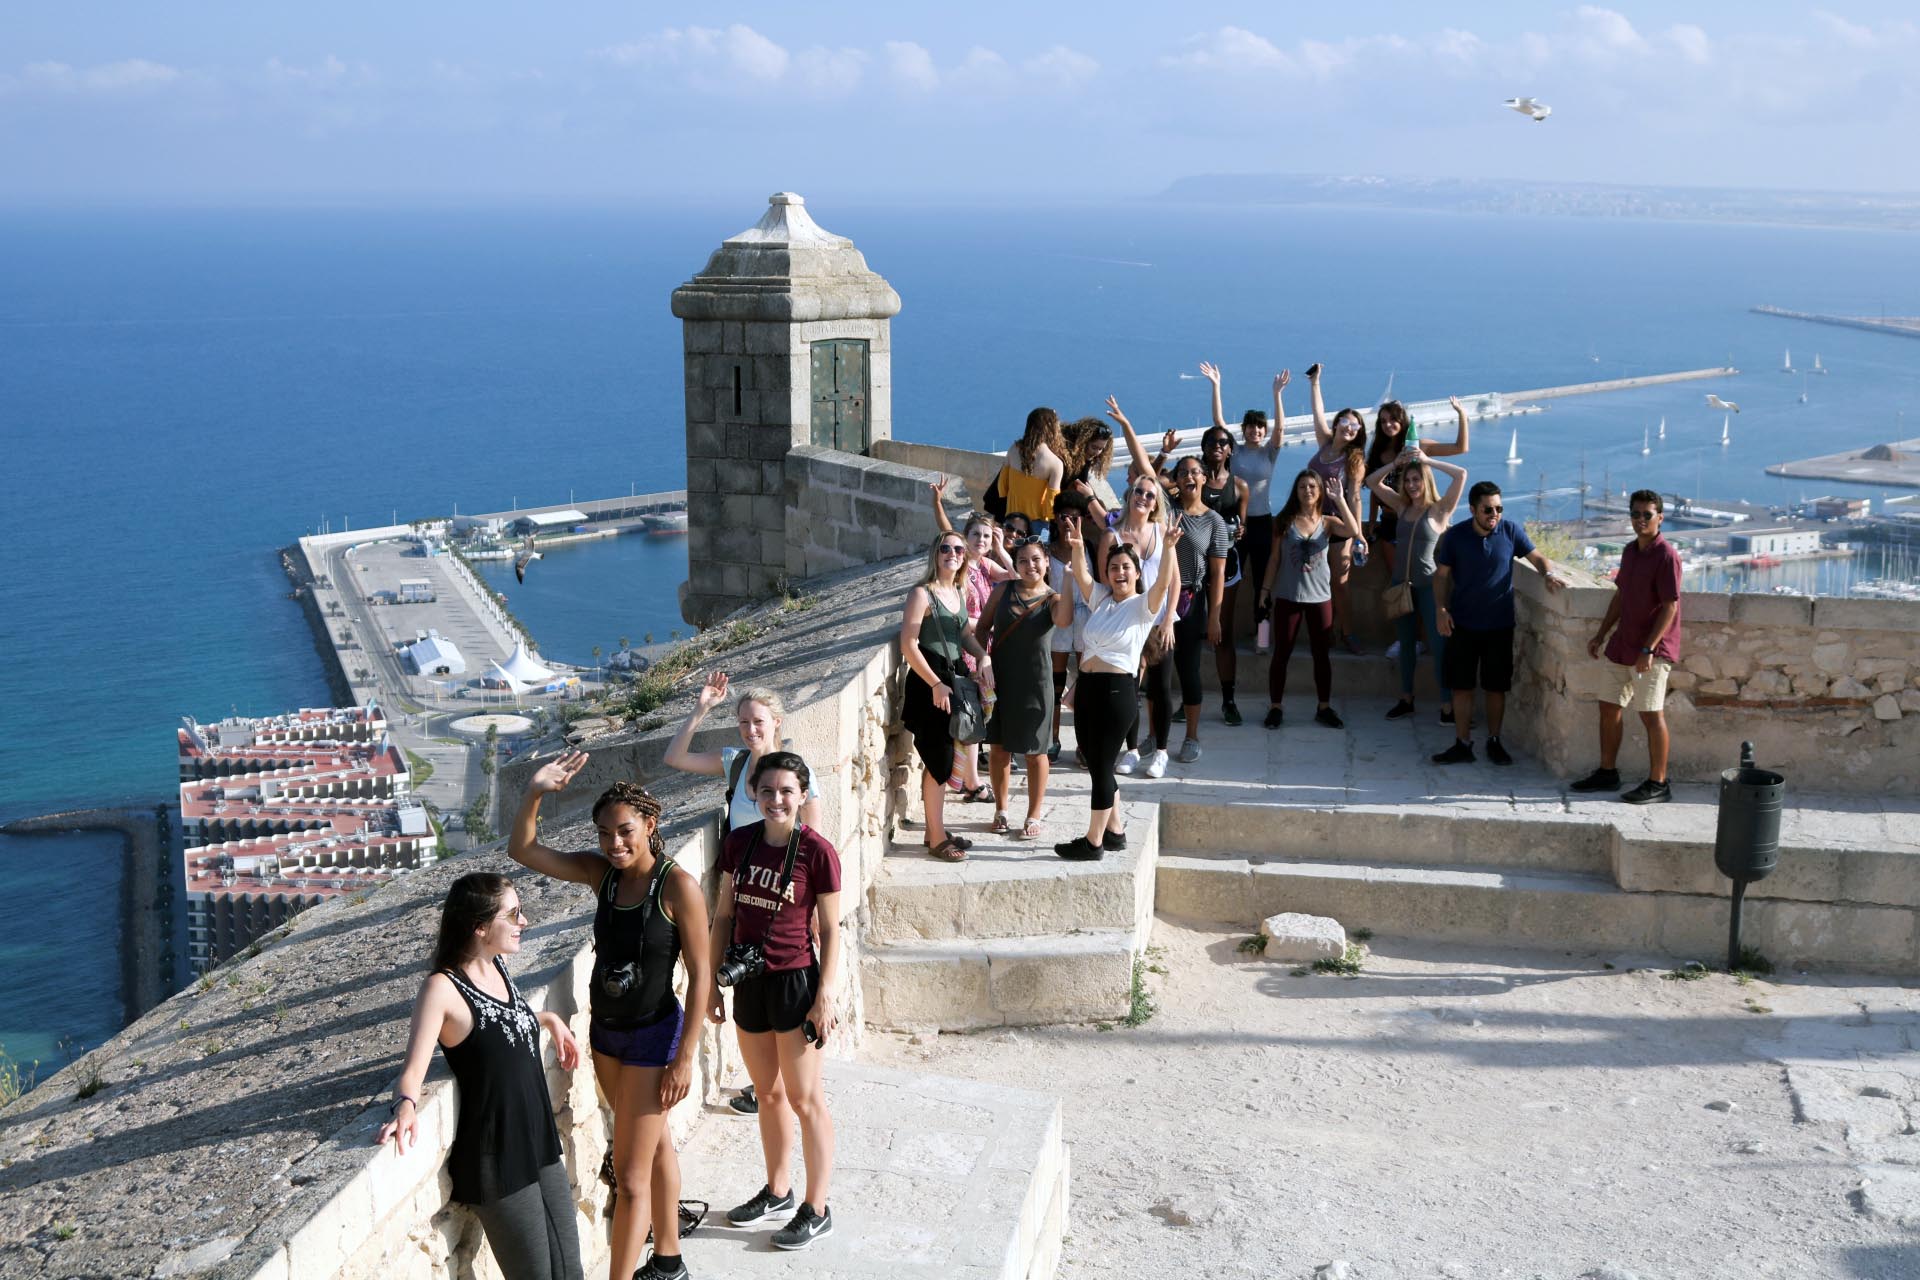 Students overlooking the city of Alicante, Spain.